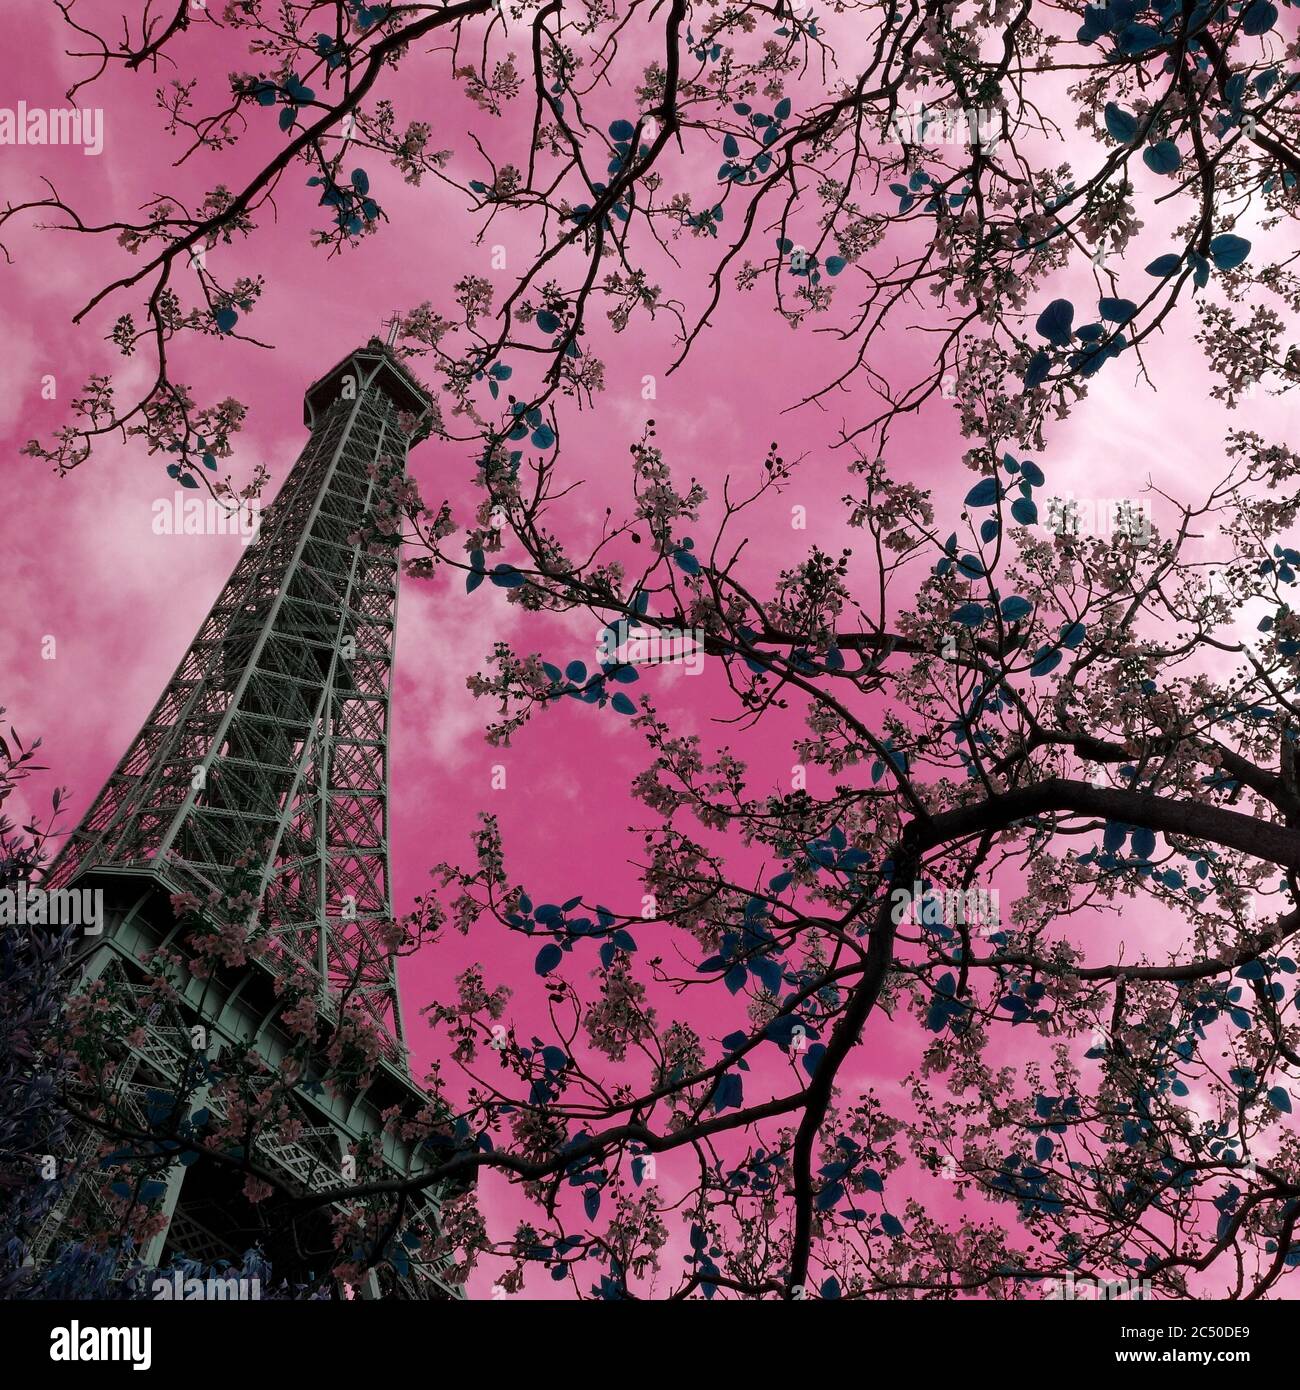 Pink Eiffel Tower High Resolution Stock Photography and Images - Alamy